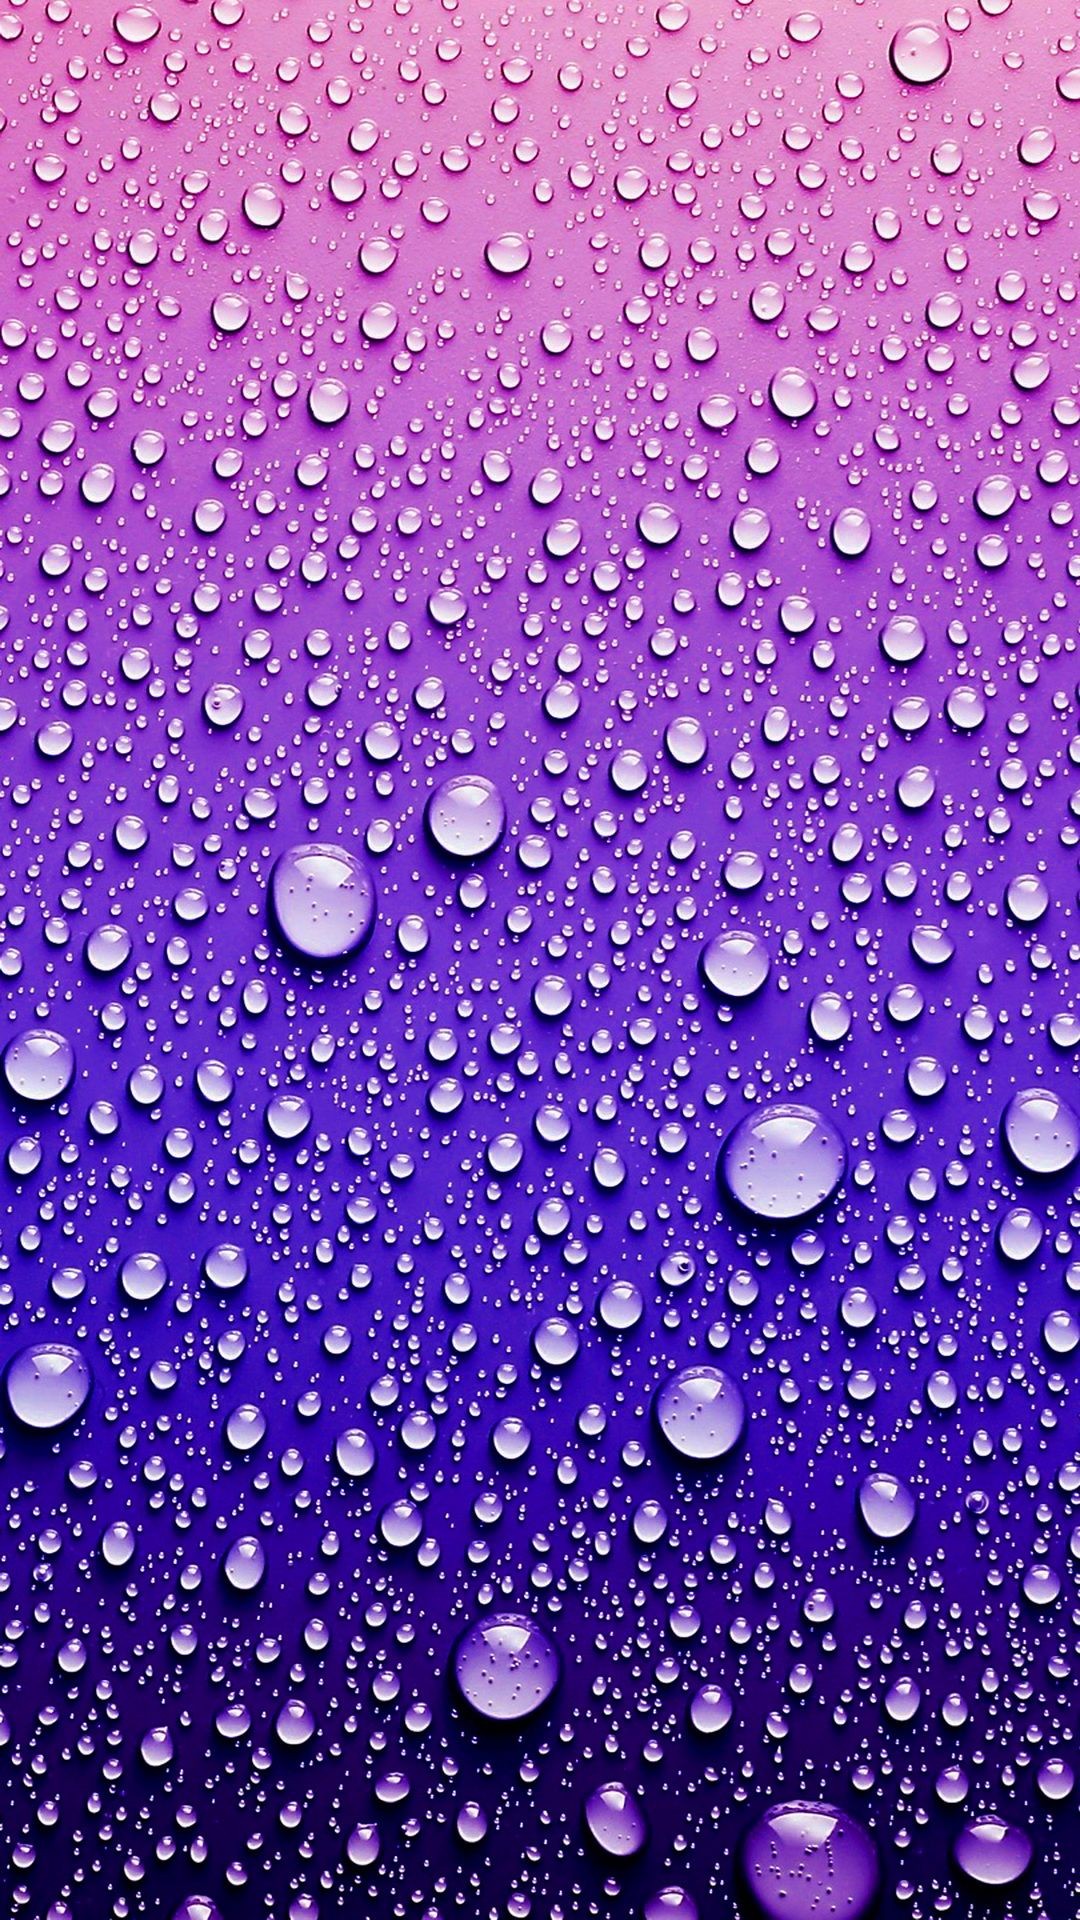 Abstract Waterdrops iPhone 6 Plus Wallpapers - abstract ...